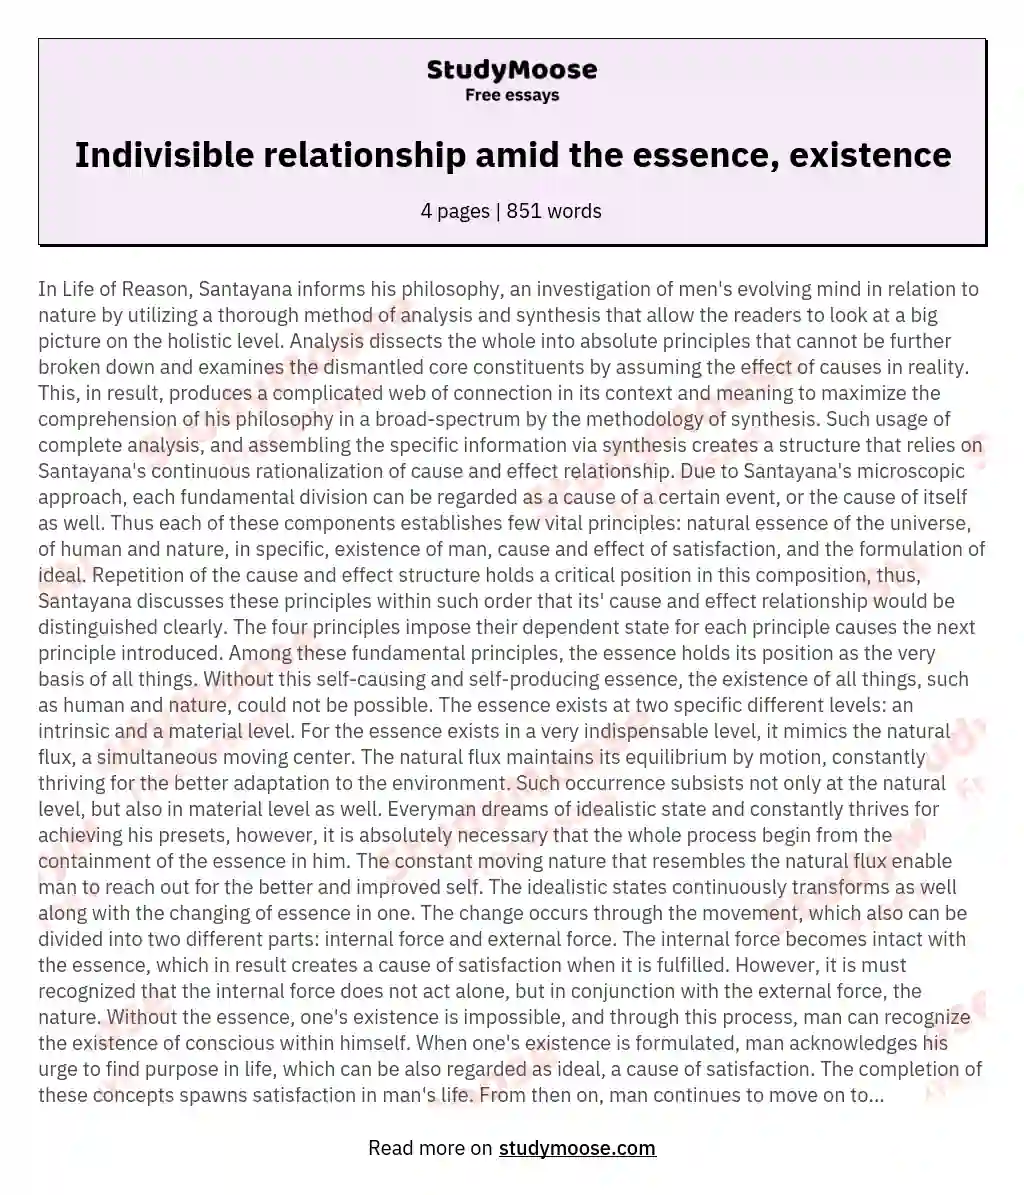 Indivisible relationship amid the essence, existence